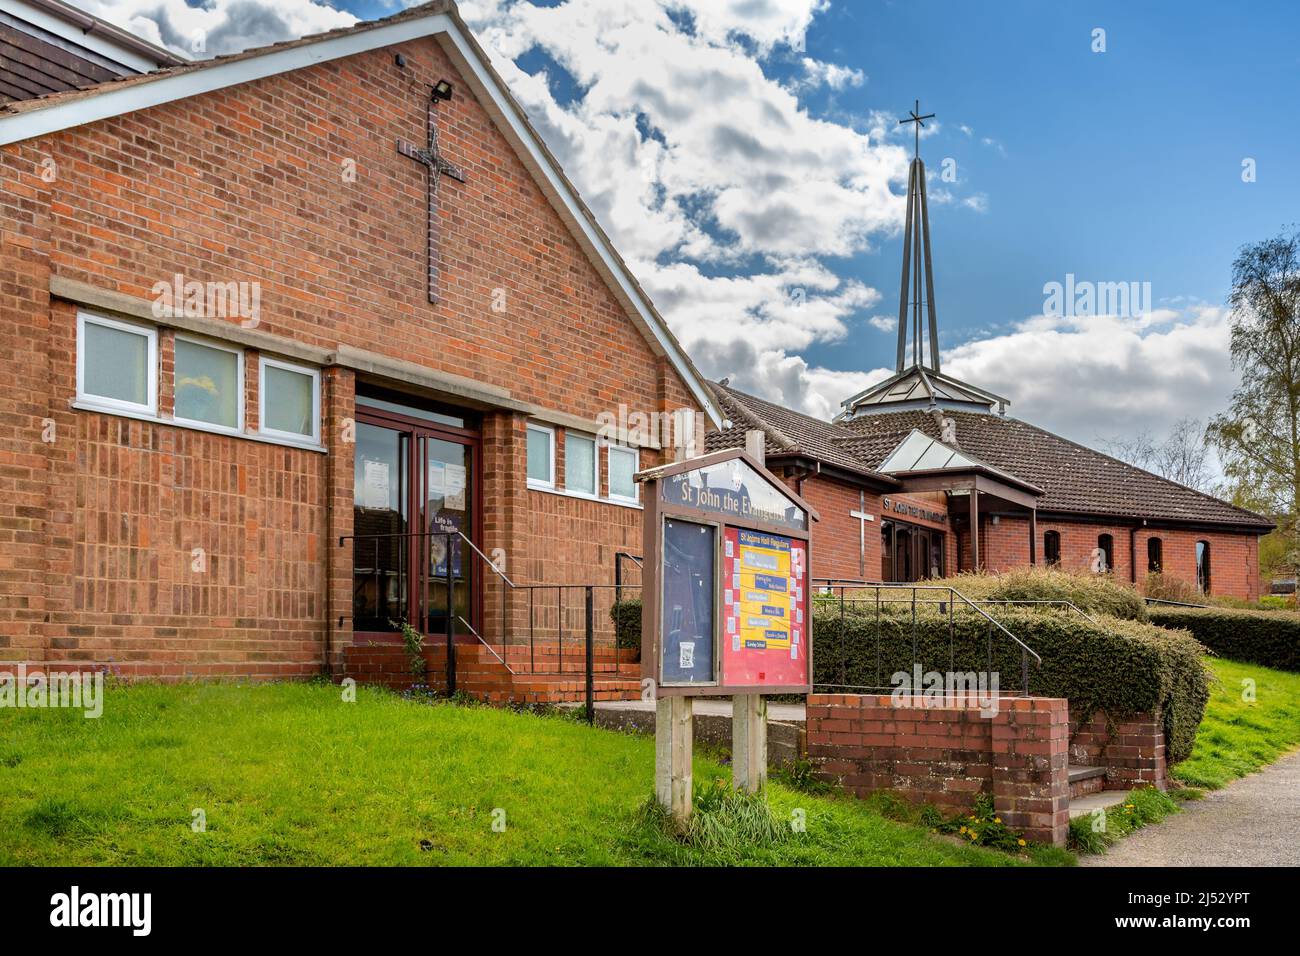 St. Johns Church Hall in Greenlands, Redditch, Worcestershire. Stock Photo